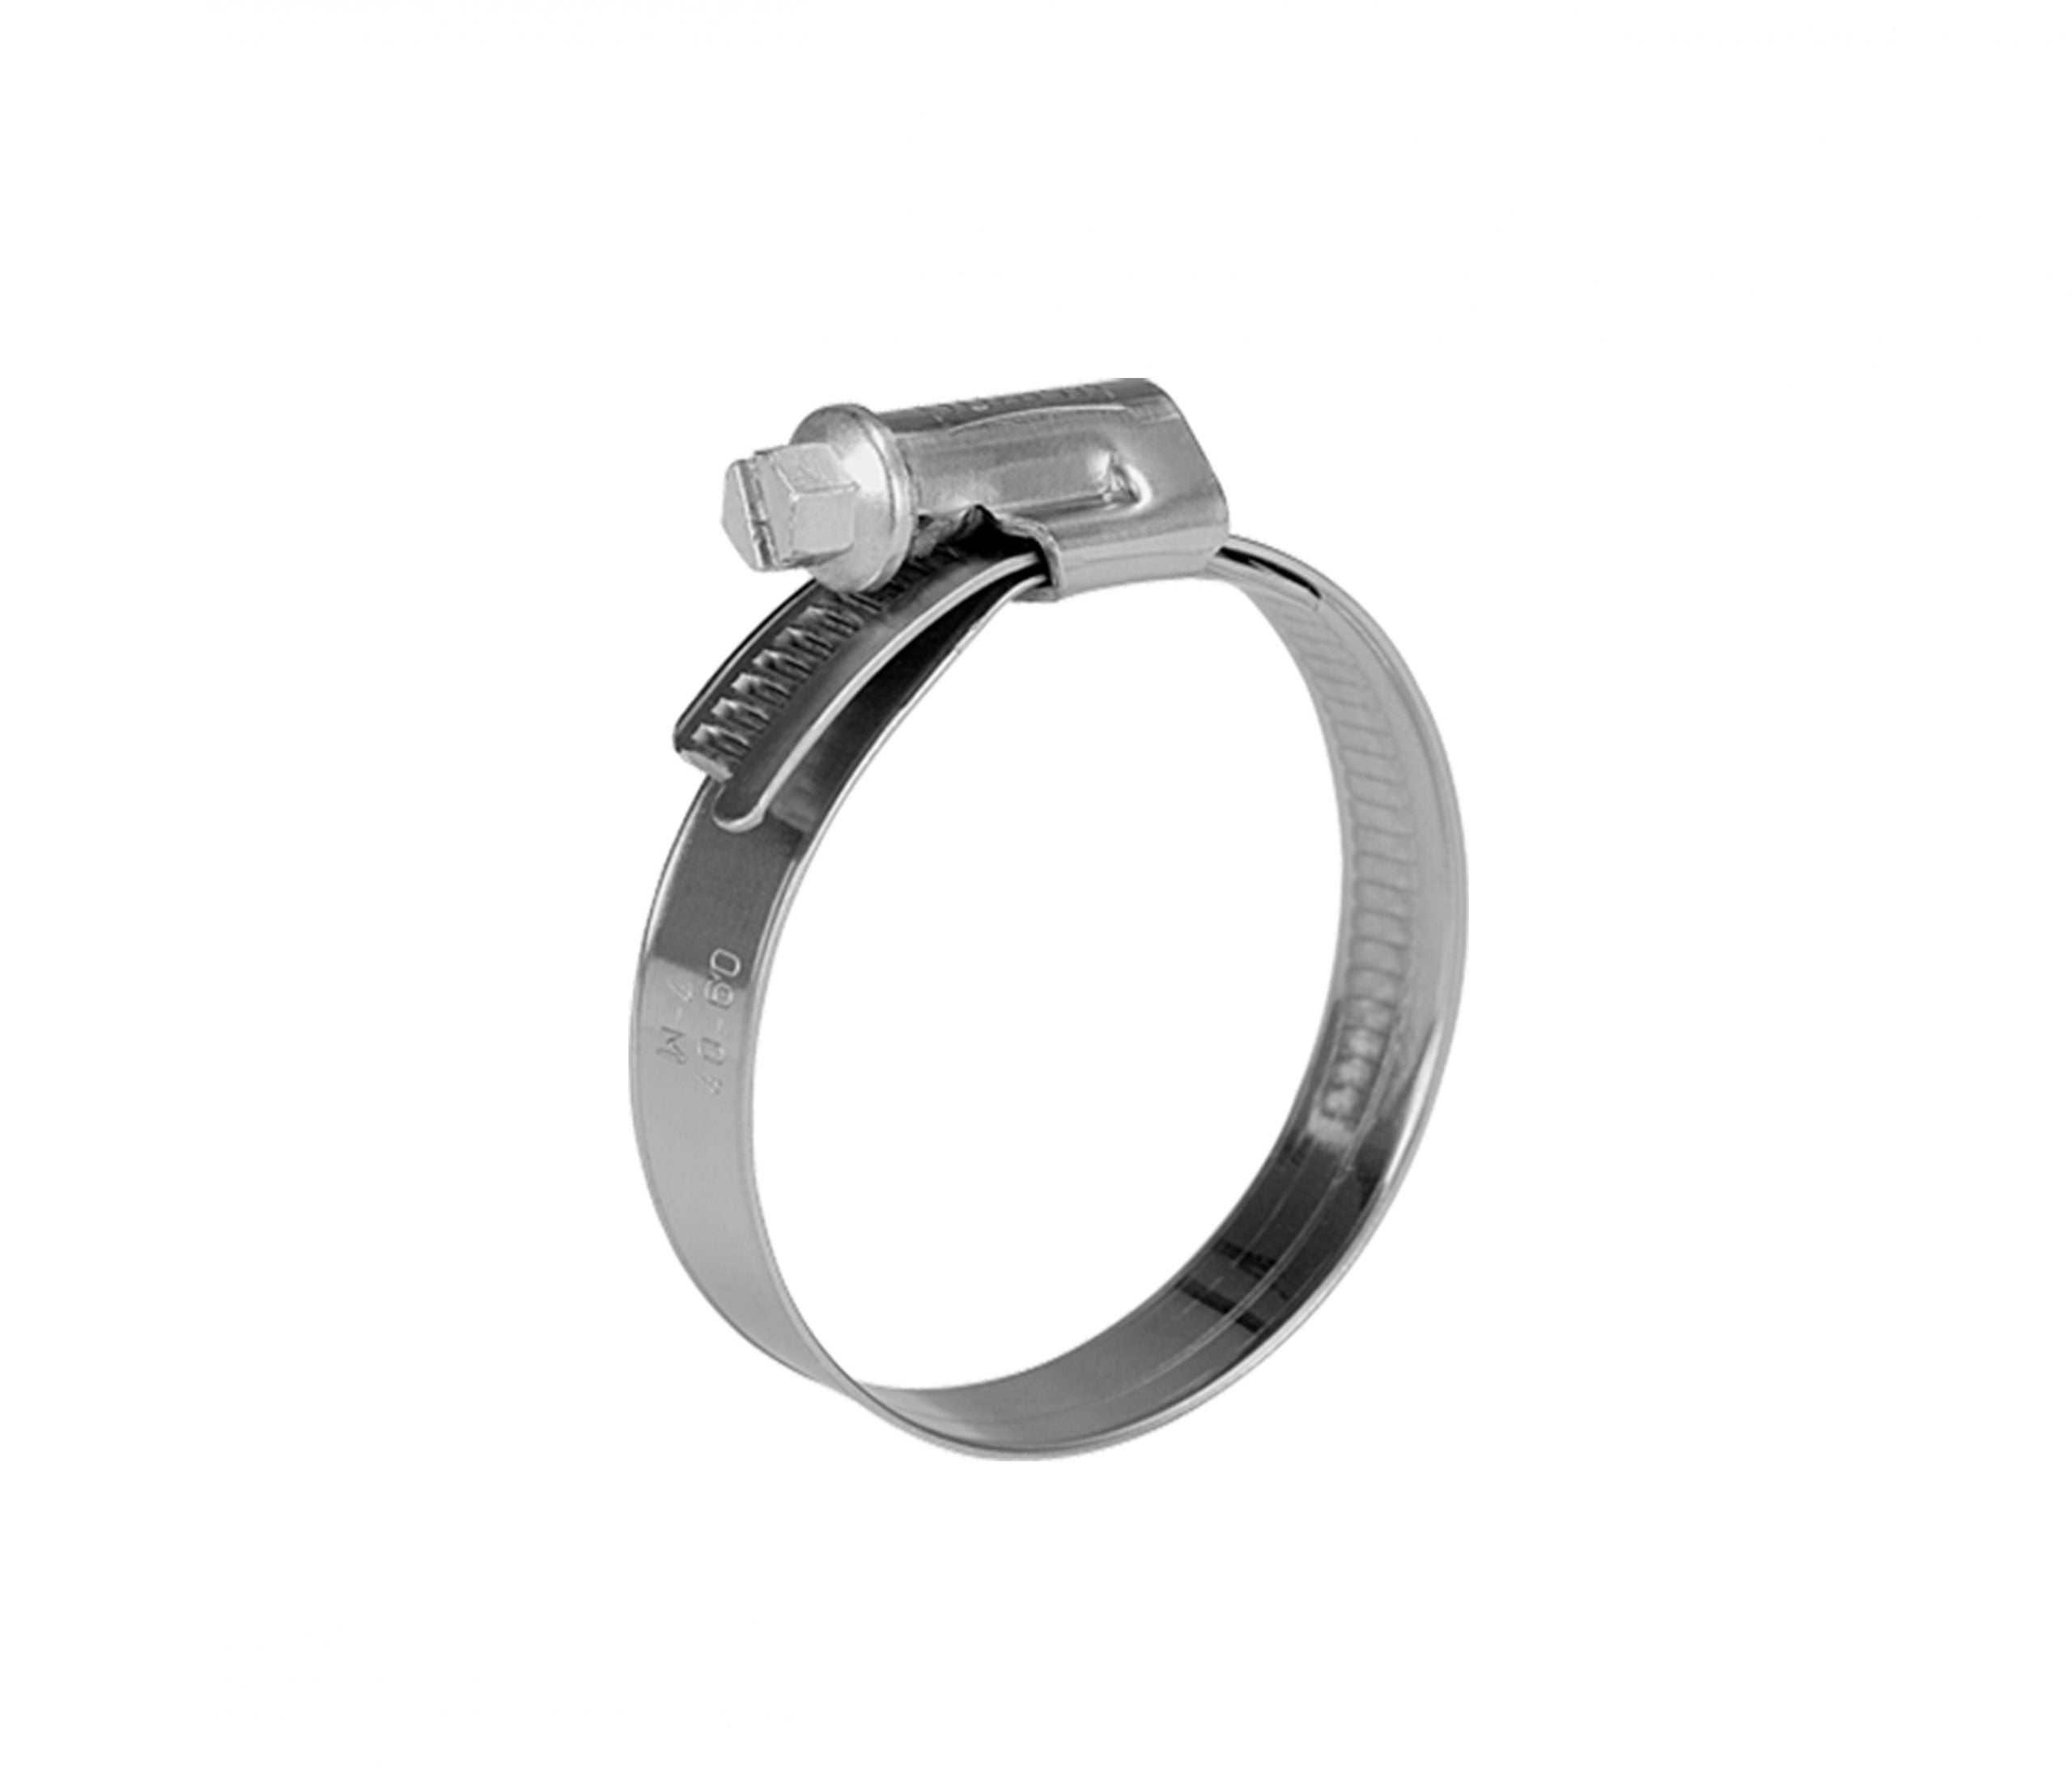 70-90mm Stainless Steel Hose Clamp with Worm Drive 722-7090 by Norma